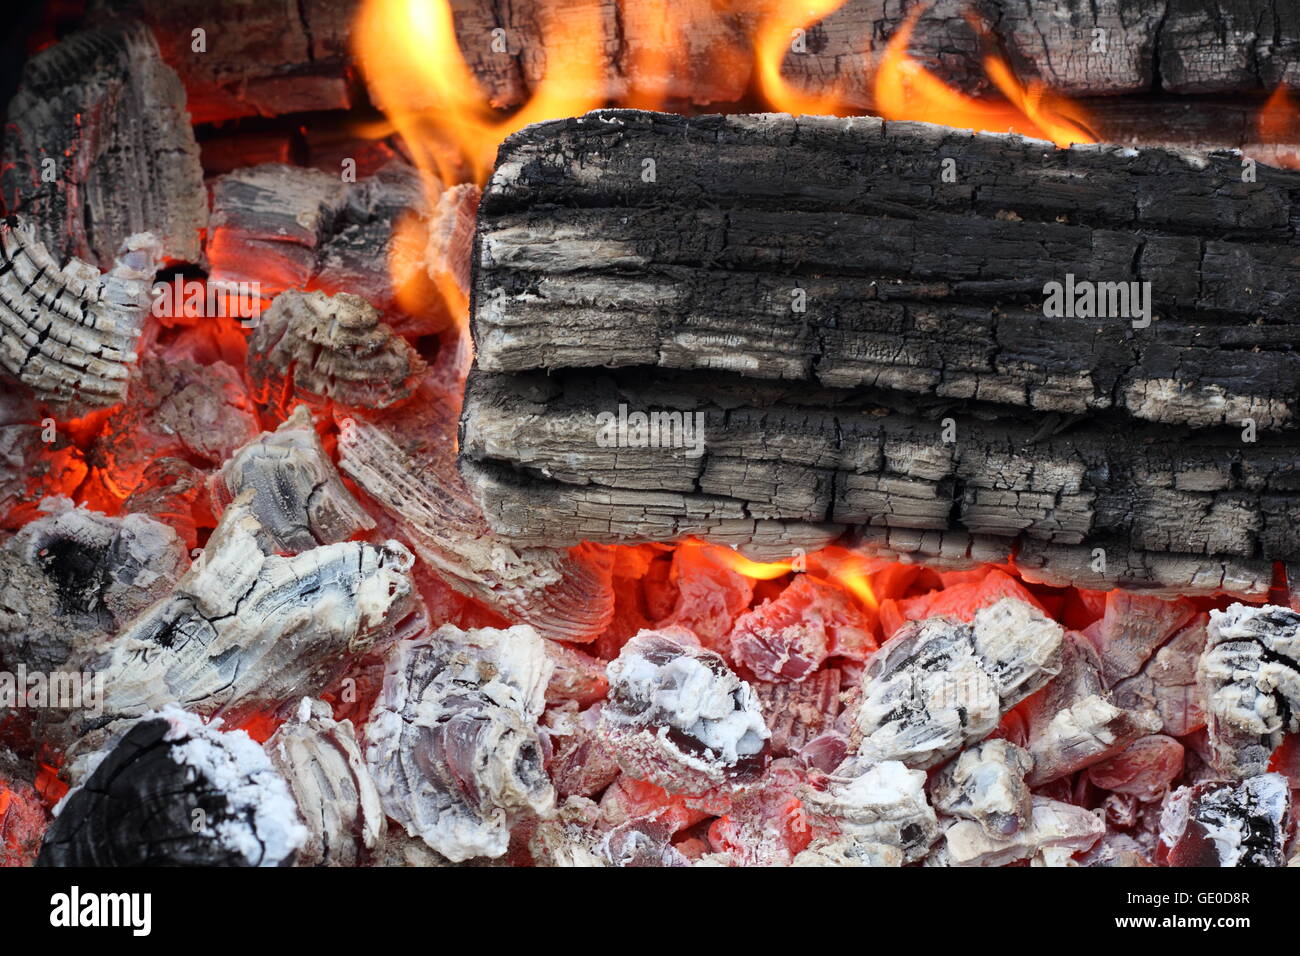 Flame on hot live charcoal extreme closeup photo Stock Photo